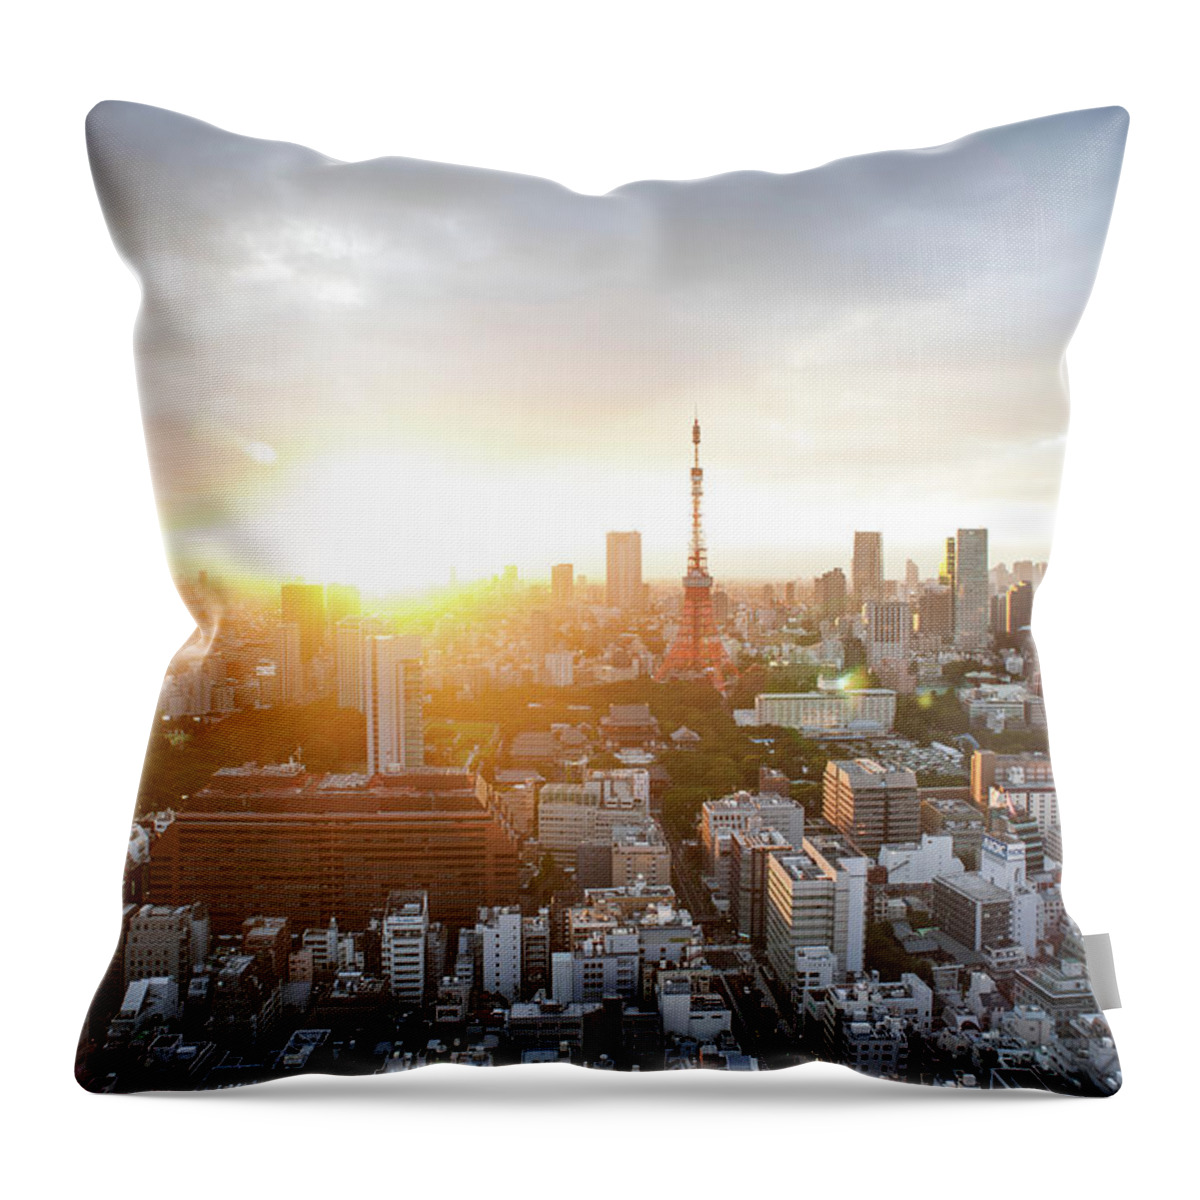 Tokyo Tower Throw Pillow featuring the photograph Sunset From The Wtc by Timothy Buerger / Timdesuyo.com